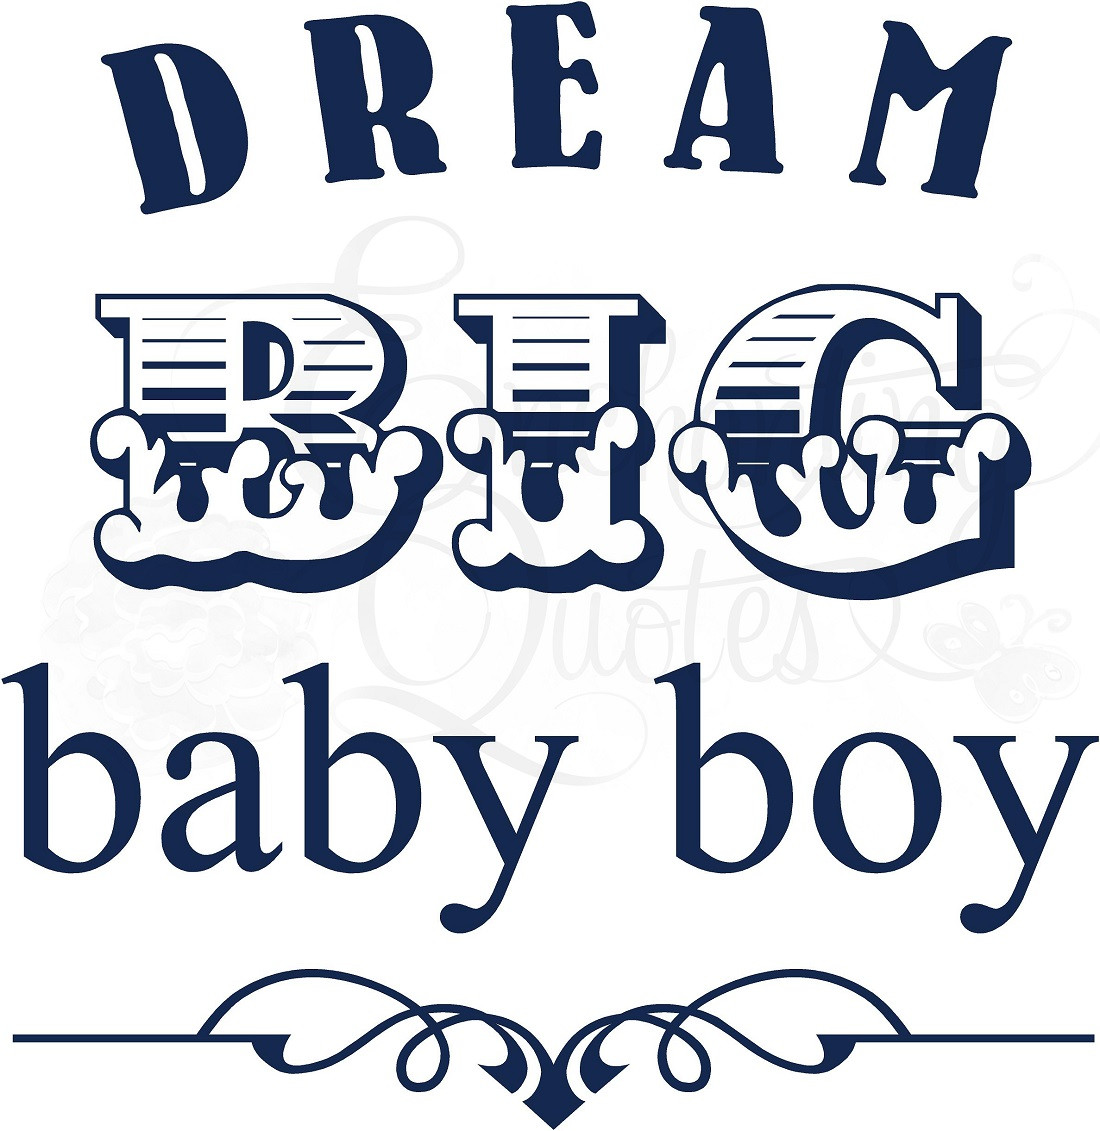 Quotes Baby Boys
 Baby Boy Quotes And Sayings QuotesGram